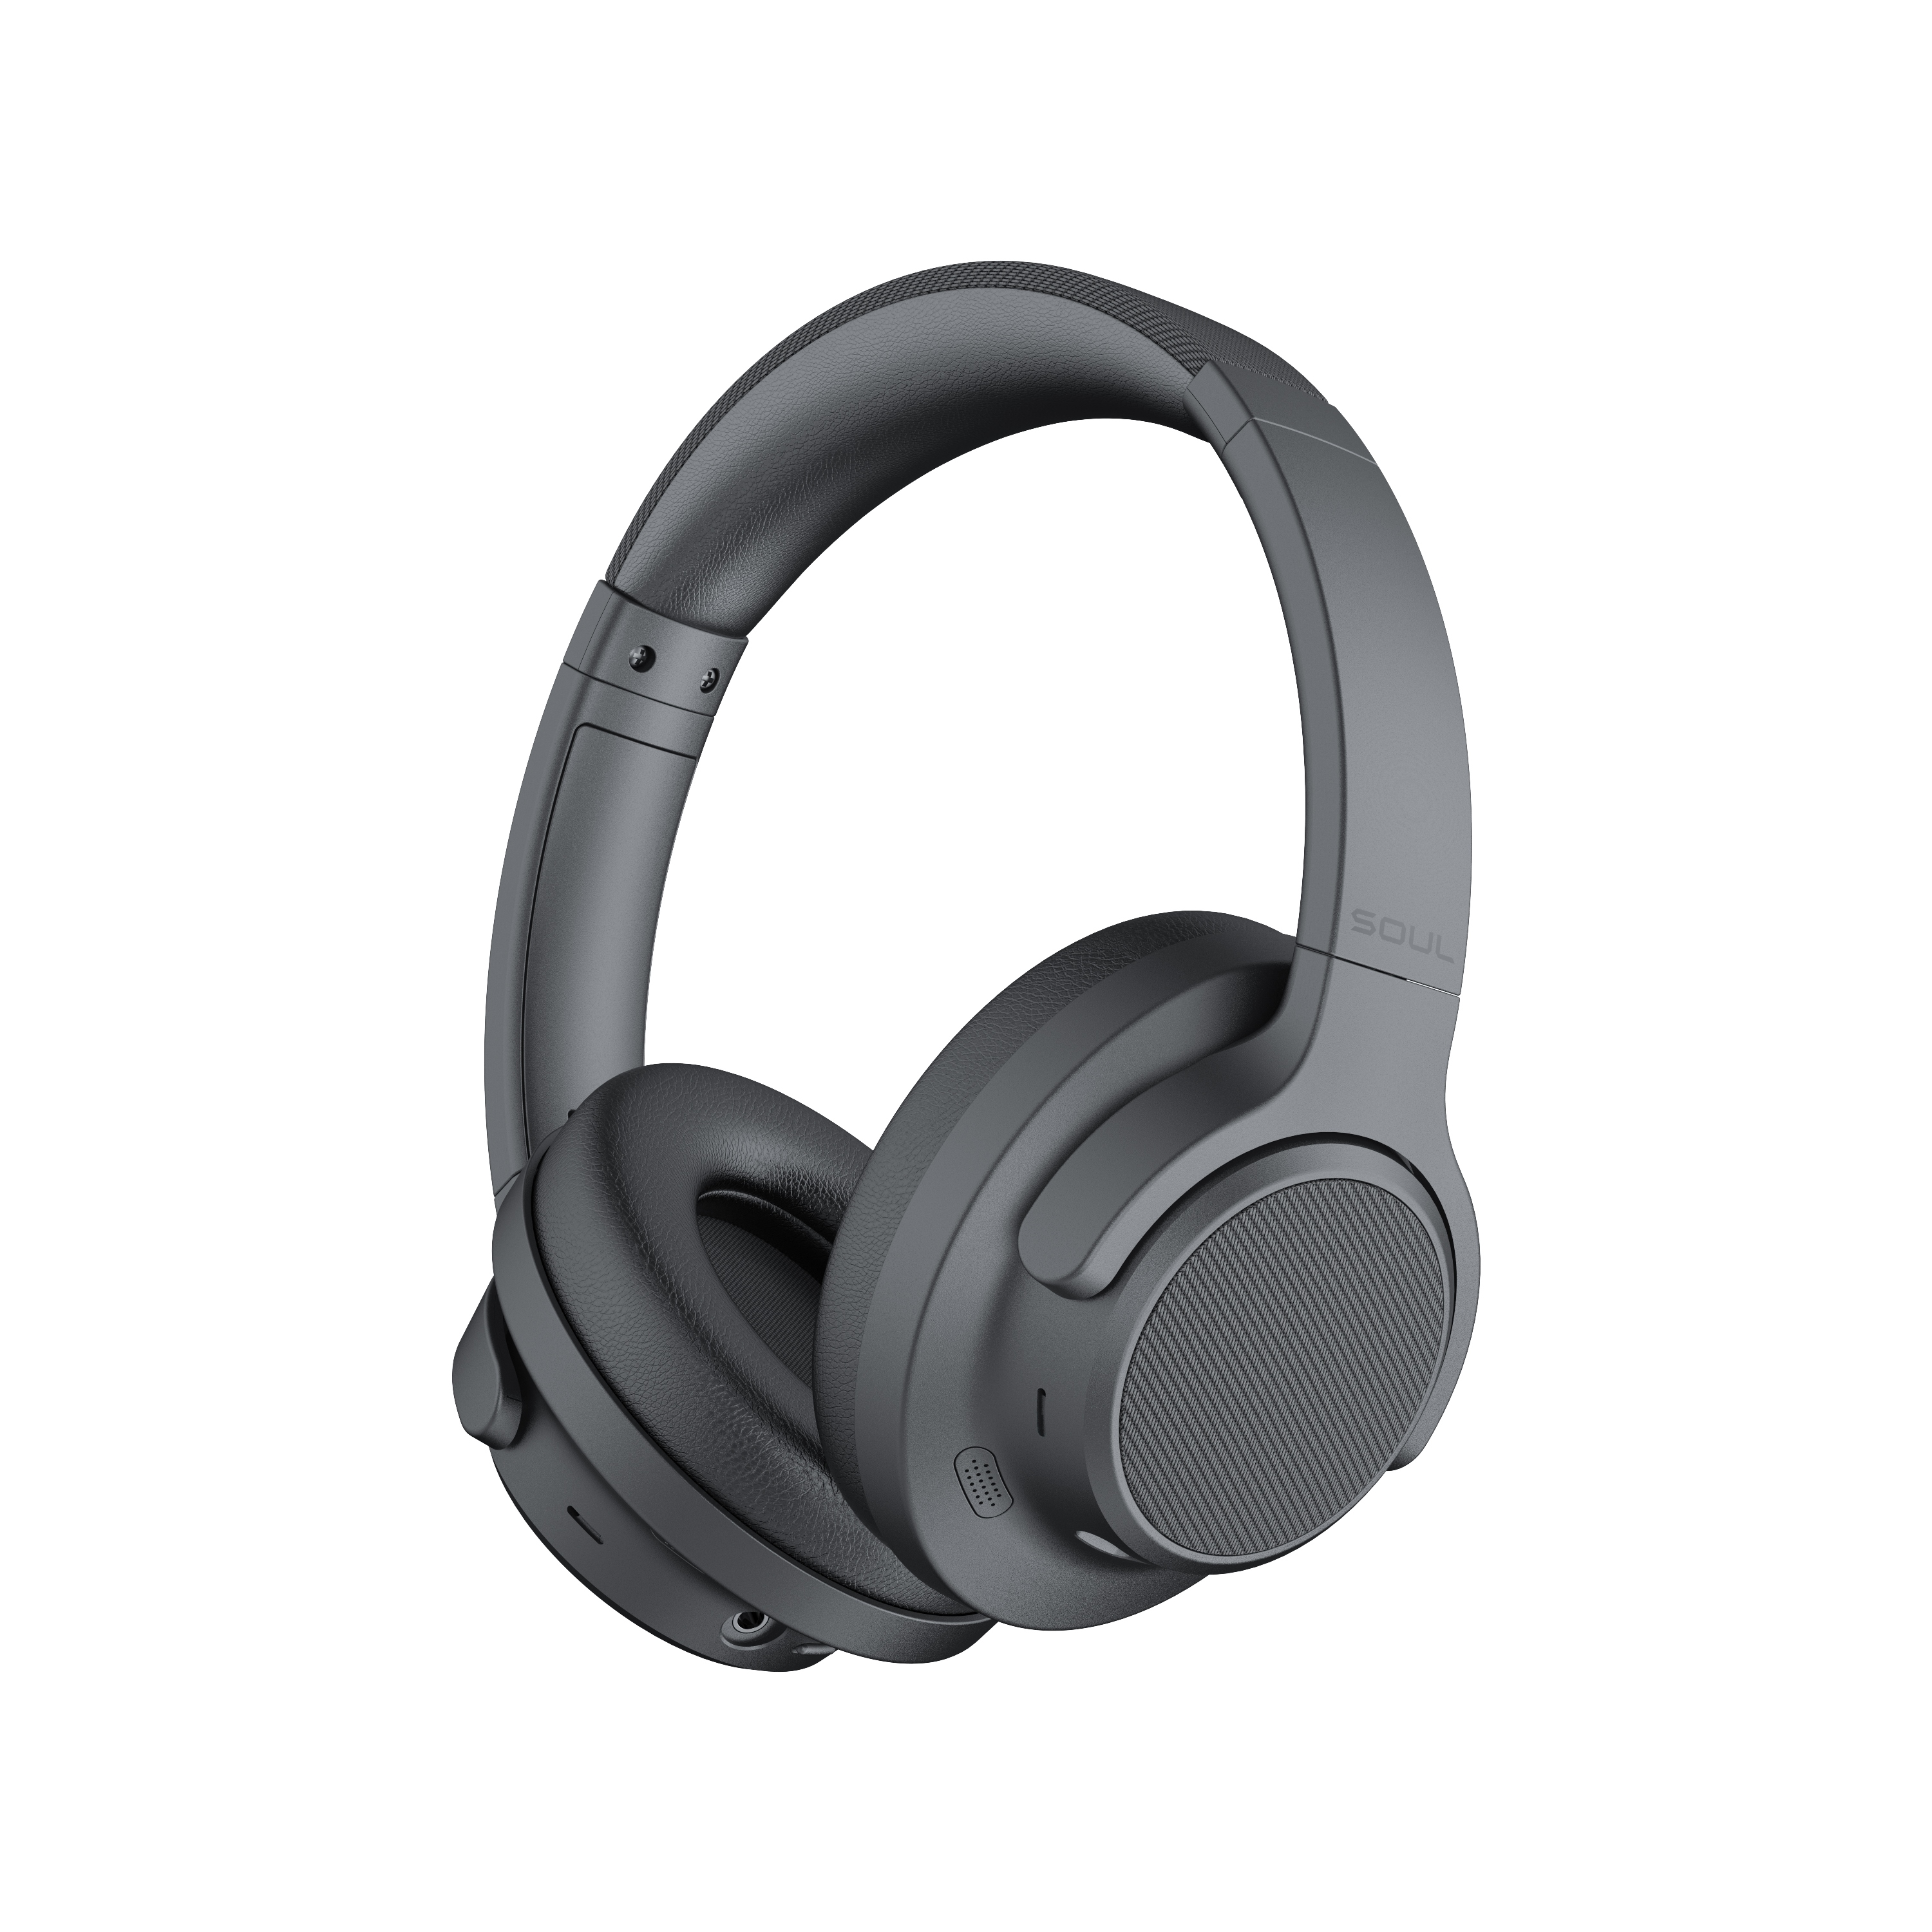 SOUL - ULTRA WIRELESS ANC - Hybrid Active Noise Cancellation Over-Ear Headphones (Black)